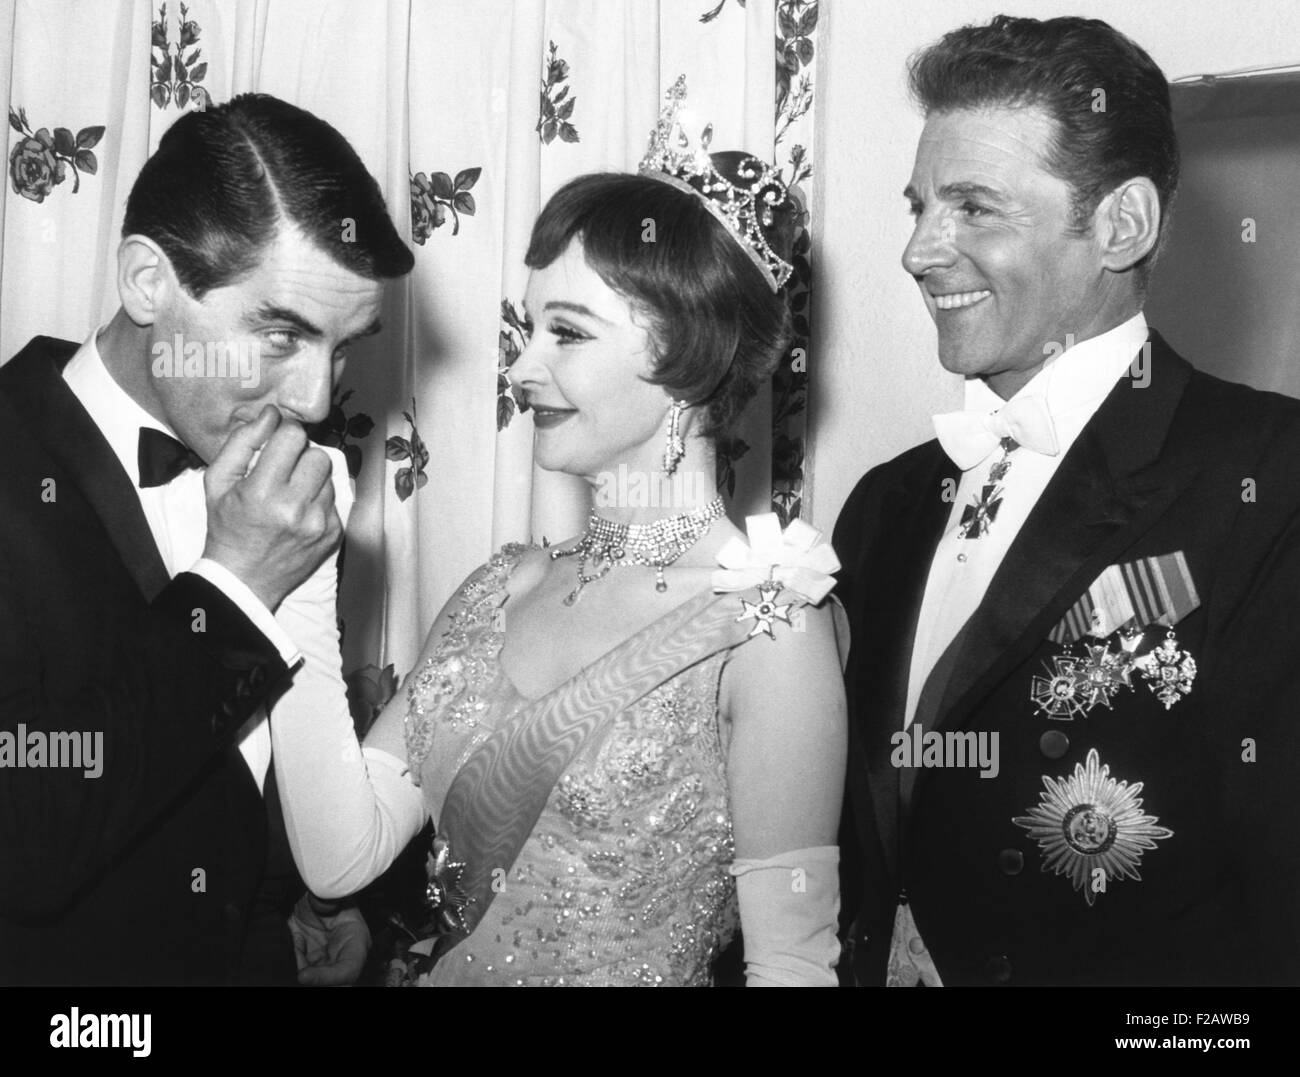 Director Peter Glenville kisses hand of Vivien Leigh's hand with actor Jean Pierre Aumont at right. March 18, 1963. It was the opening night of the Broadway musical TOVARICH, which ran for 264 performances and won Leigh the Tony Award for Best Actress. (CSU 2015 11 1436) Stock Photo